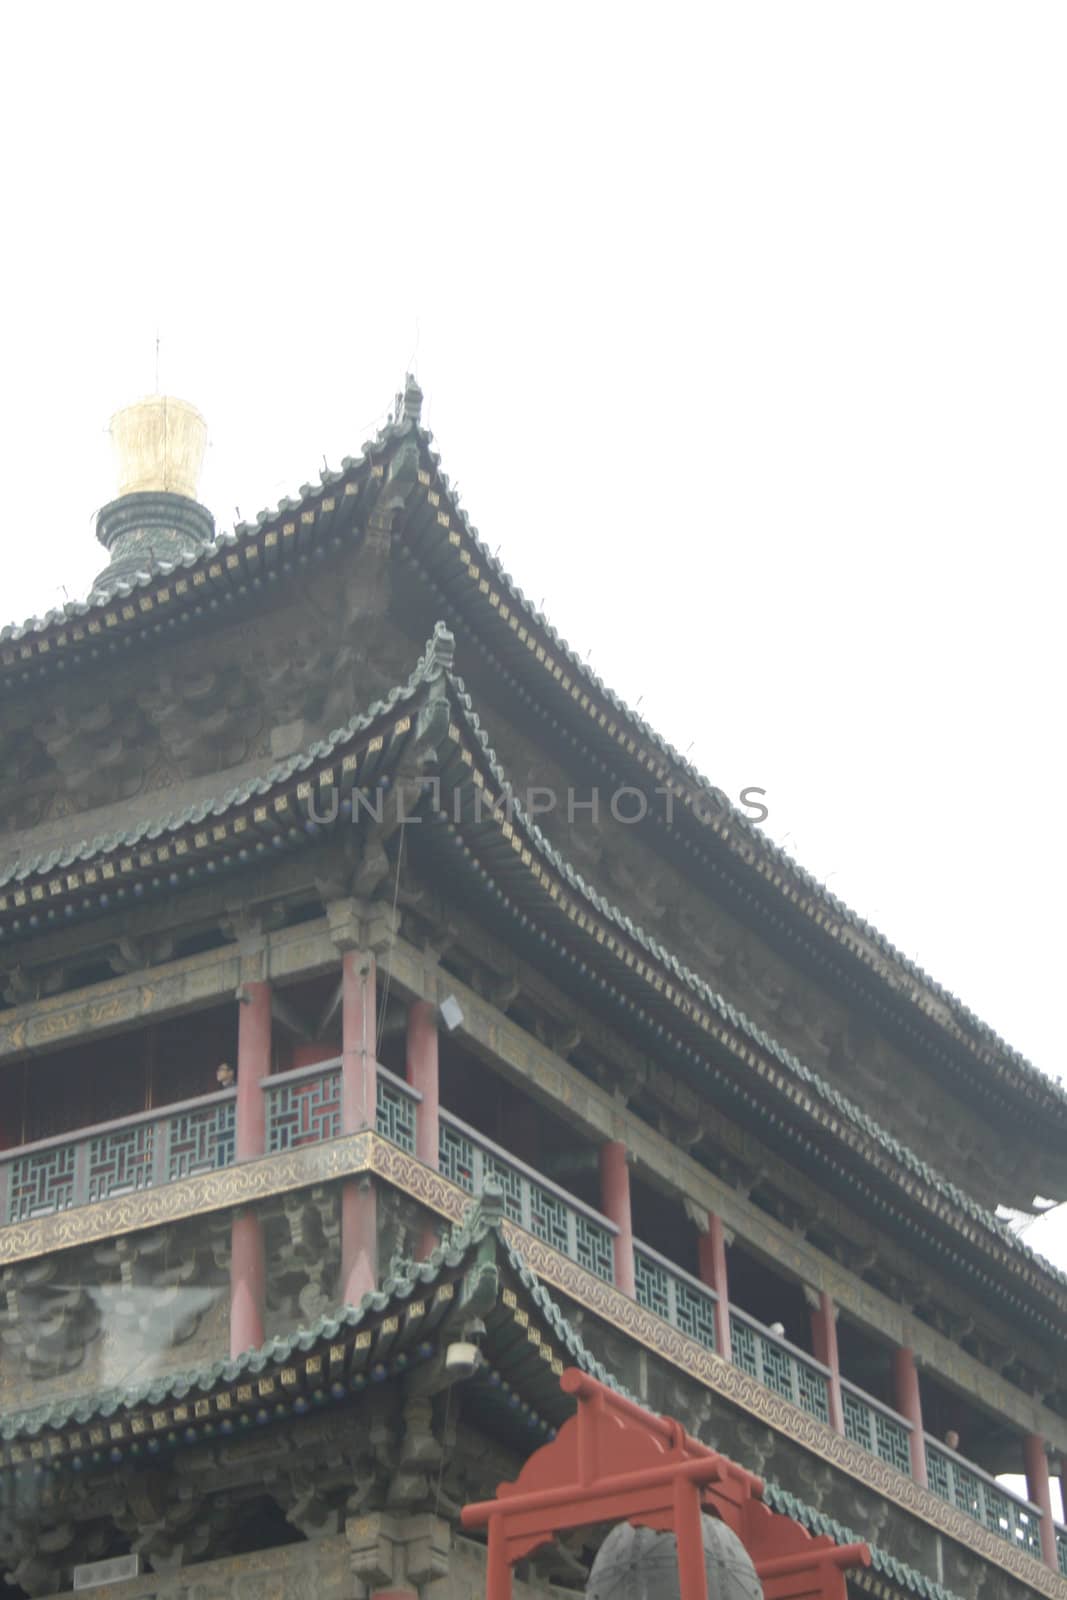 Bell tower in downtown Xi'an, China